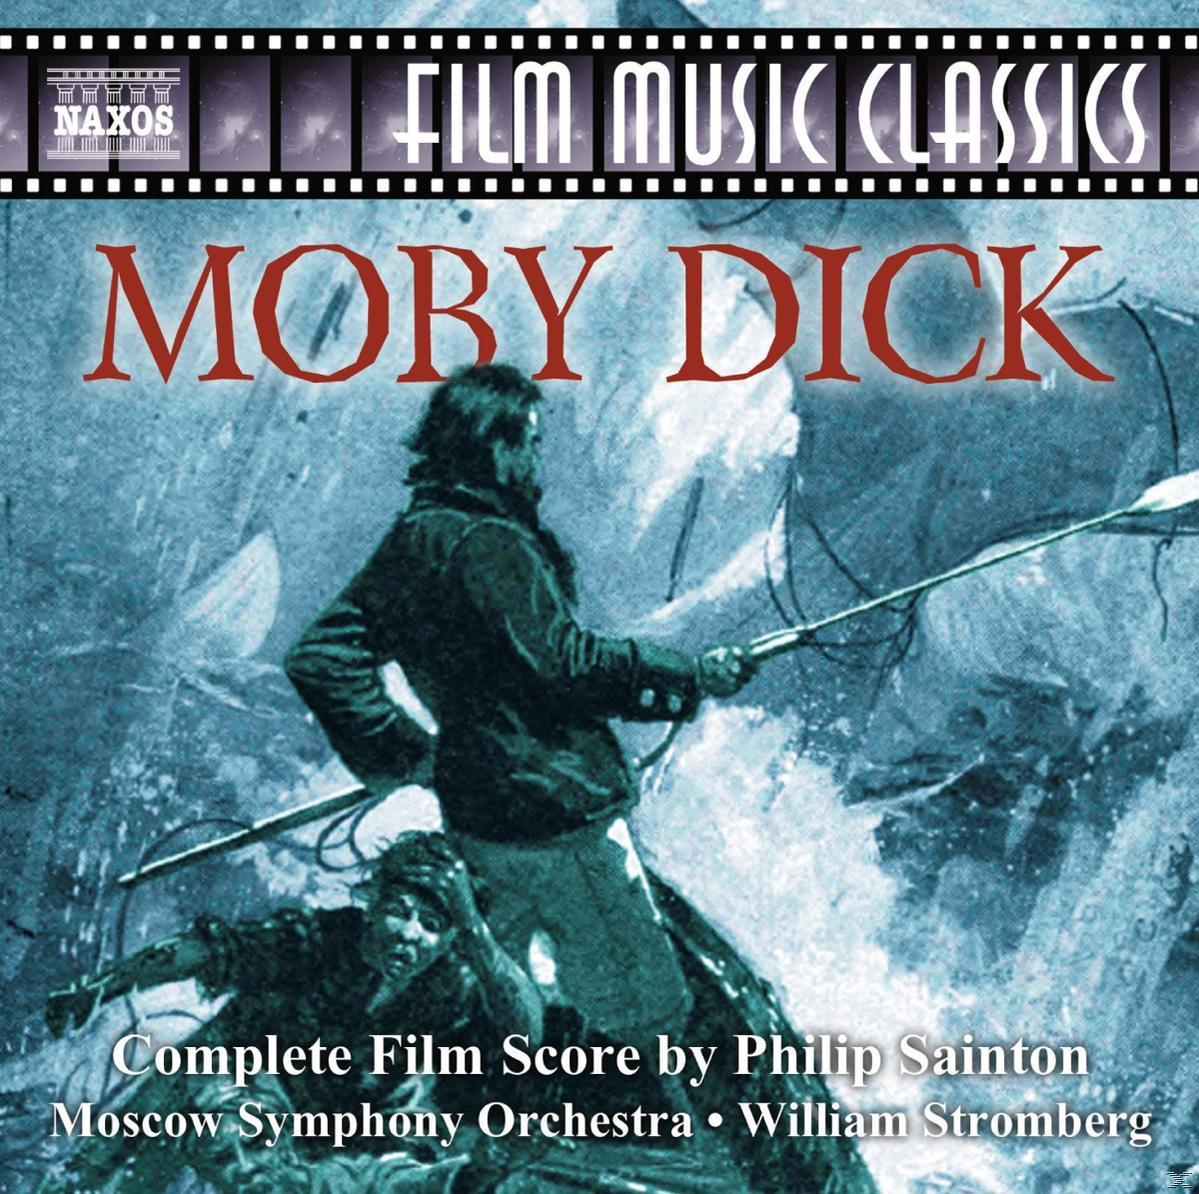 Moscow Symphony (CD) MOBY DICK - - Orchestra